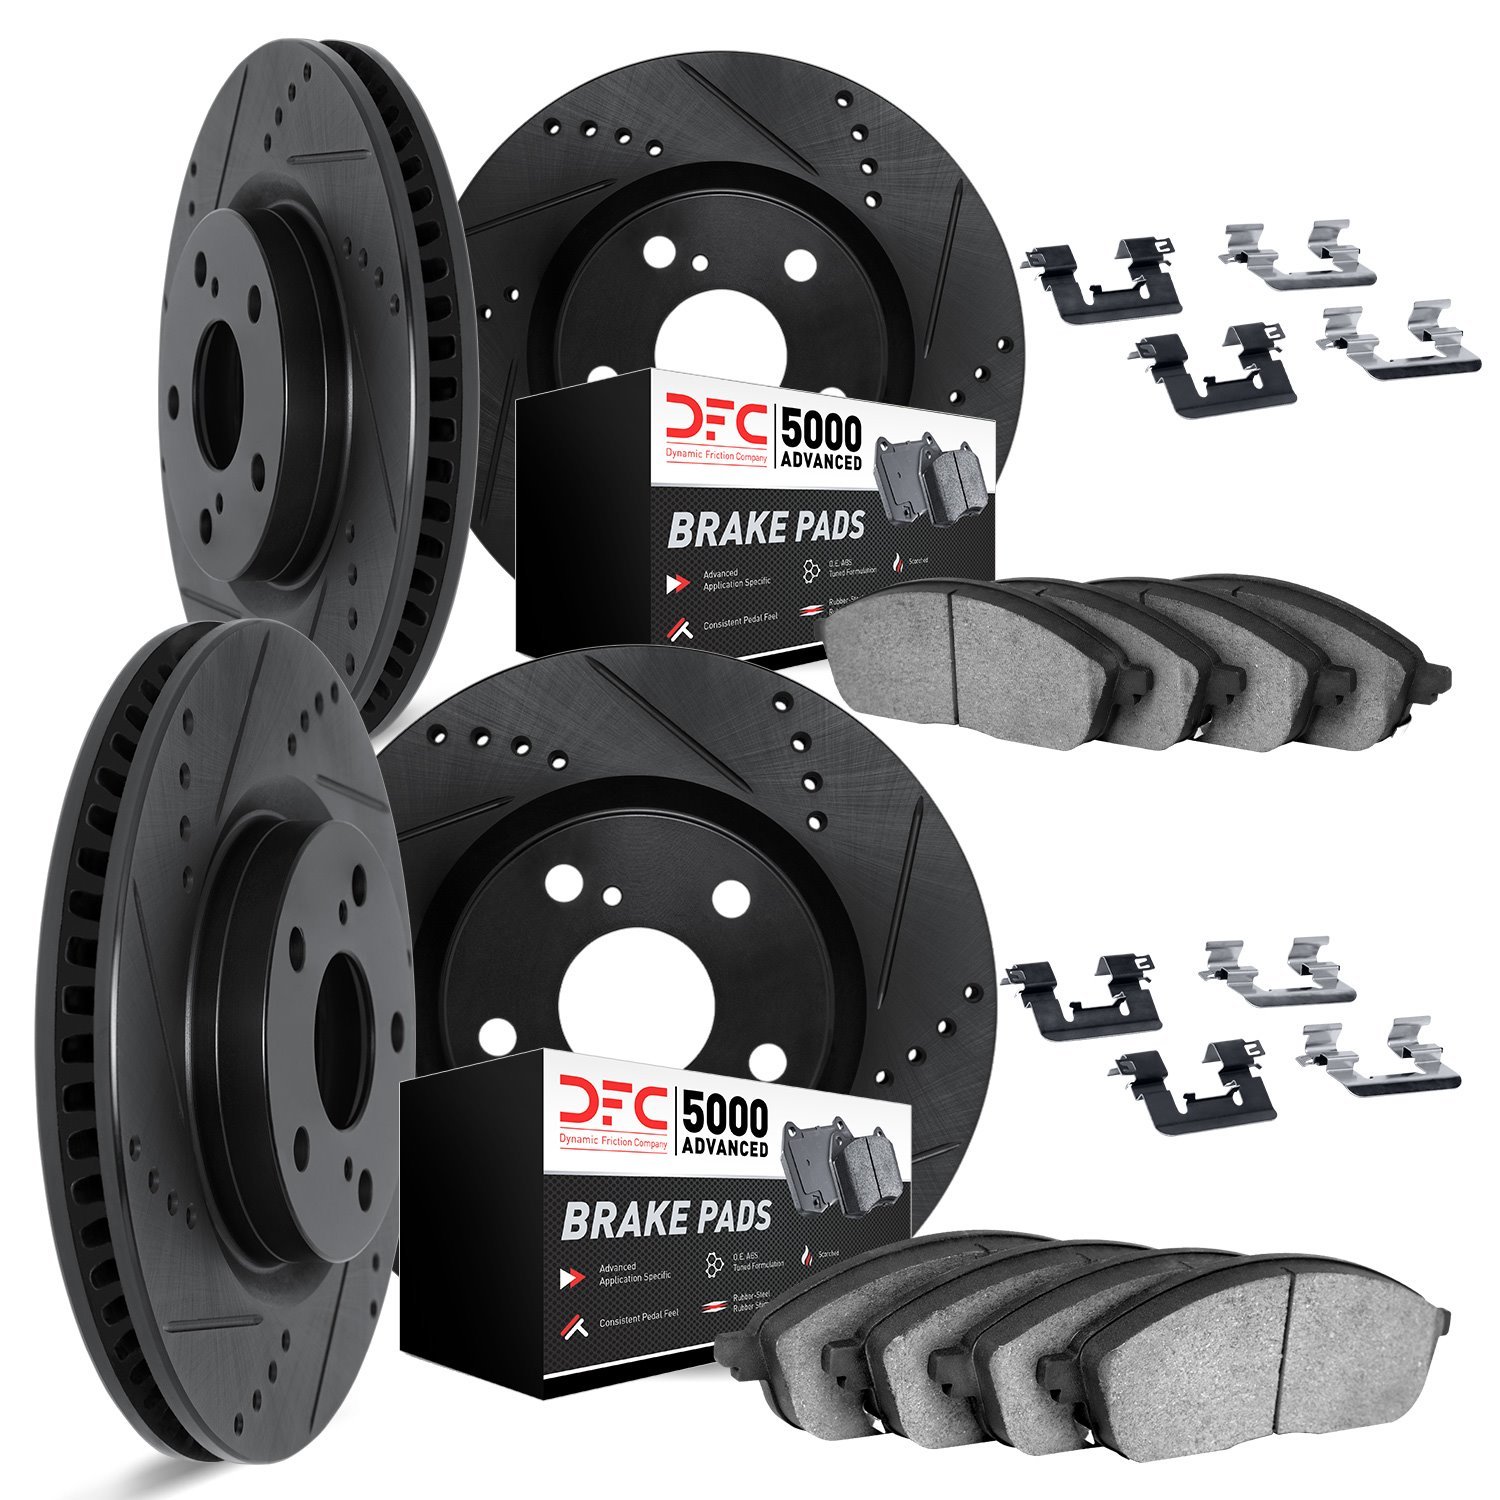 8514-13025 Drilled/Slotted Brake Rotors w/5000 Advanced Brake Pads Kit & Hardware [Black], Fits Select Subaru, Position: Front a